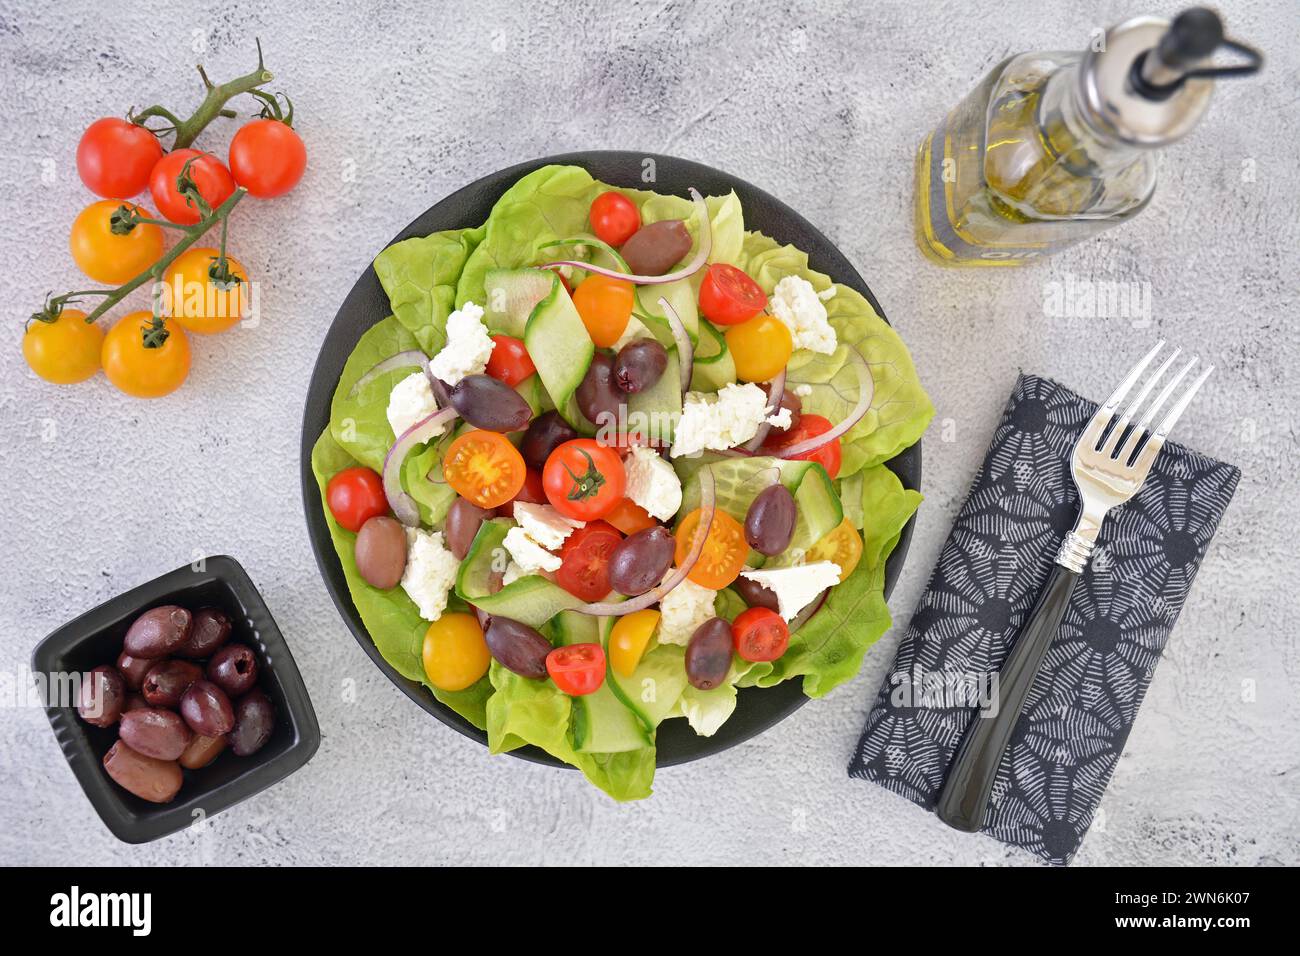 Healthy nutritious Greek salad with cherry tomatoes,Kalamata olives,feta cheese red onion slices and cucumber ribbons on stone background in flat lay Stock Photo